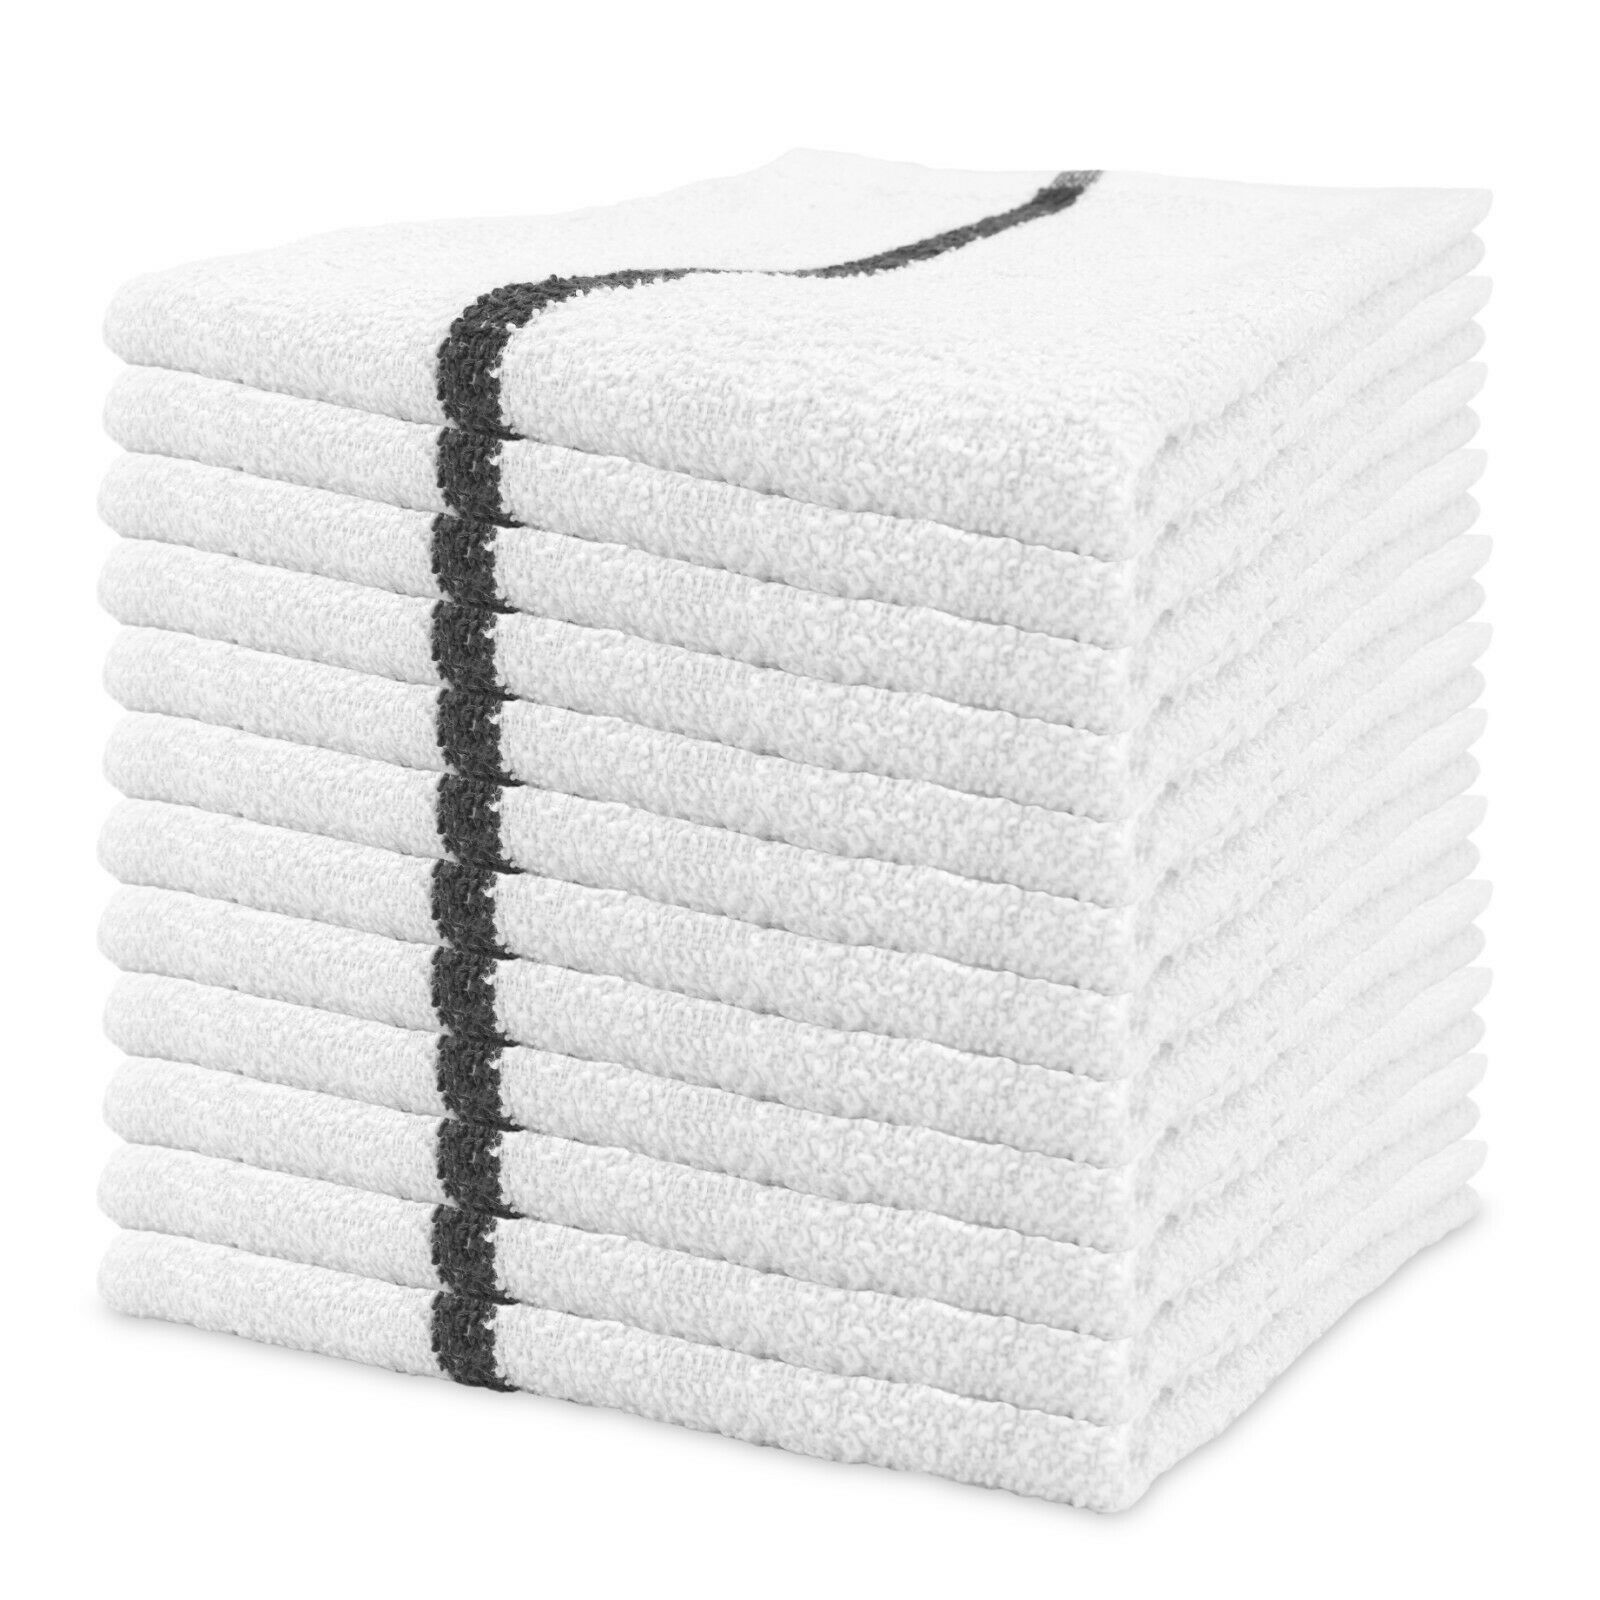 Qwick Wick Bar Mop Terry Towels -  16 X 19 Cotton Kitchen Towels - Packs Of 12